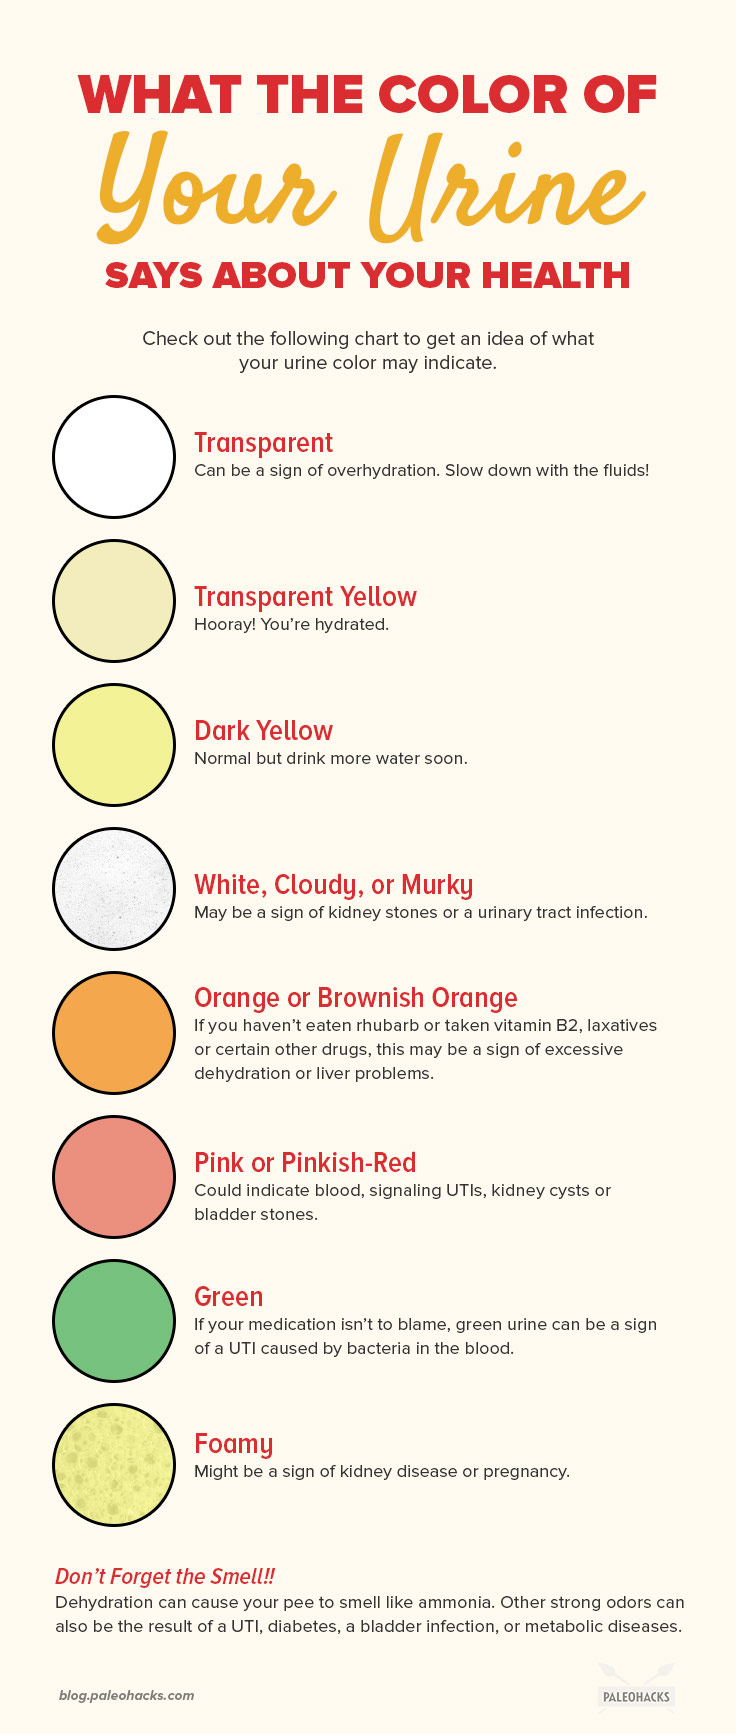 What The Color of Your Urine Says About Your Health | PaleoHacks Blog